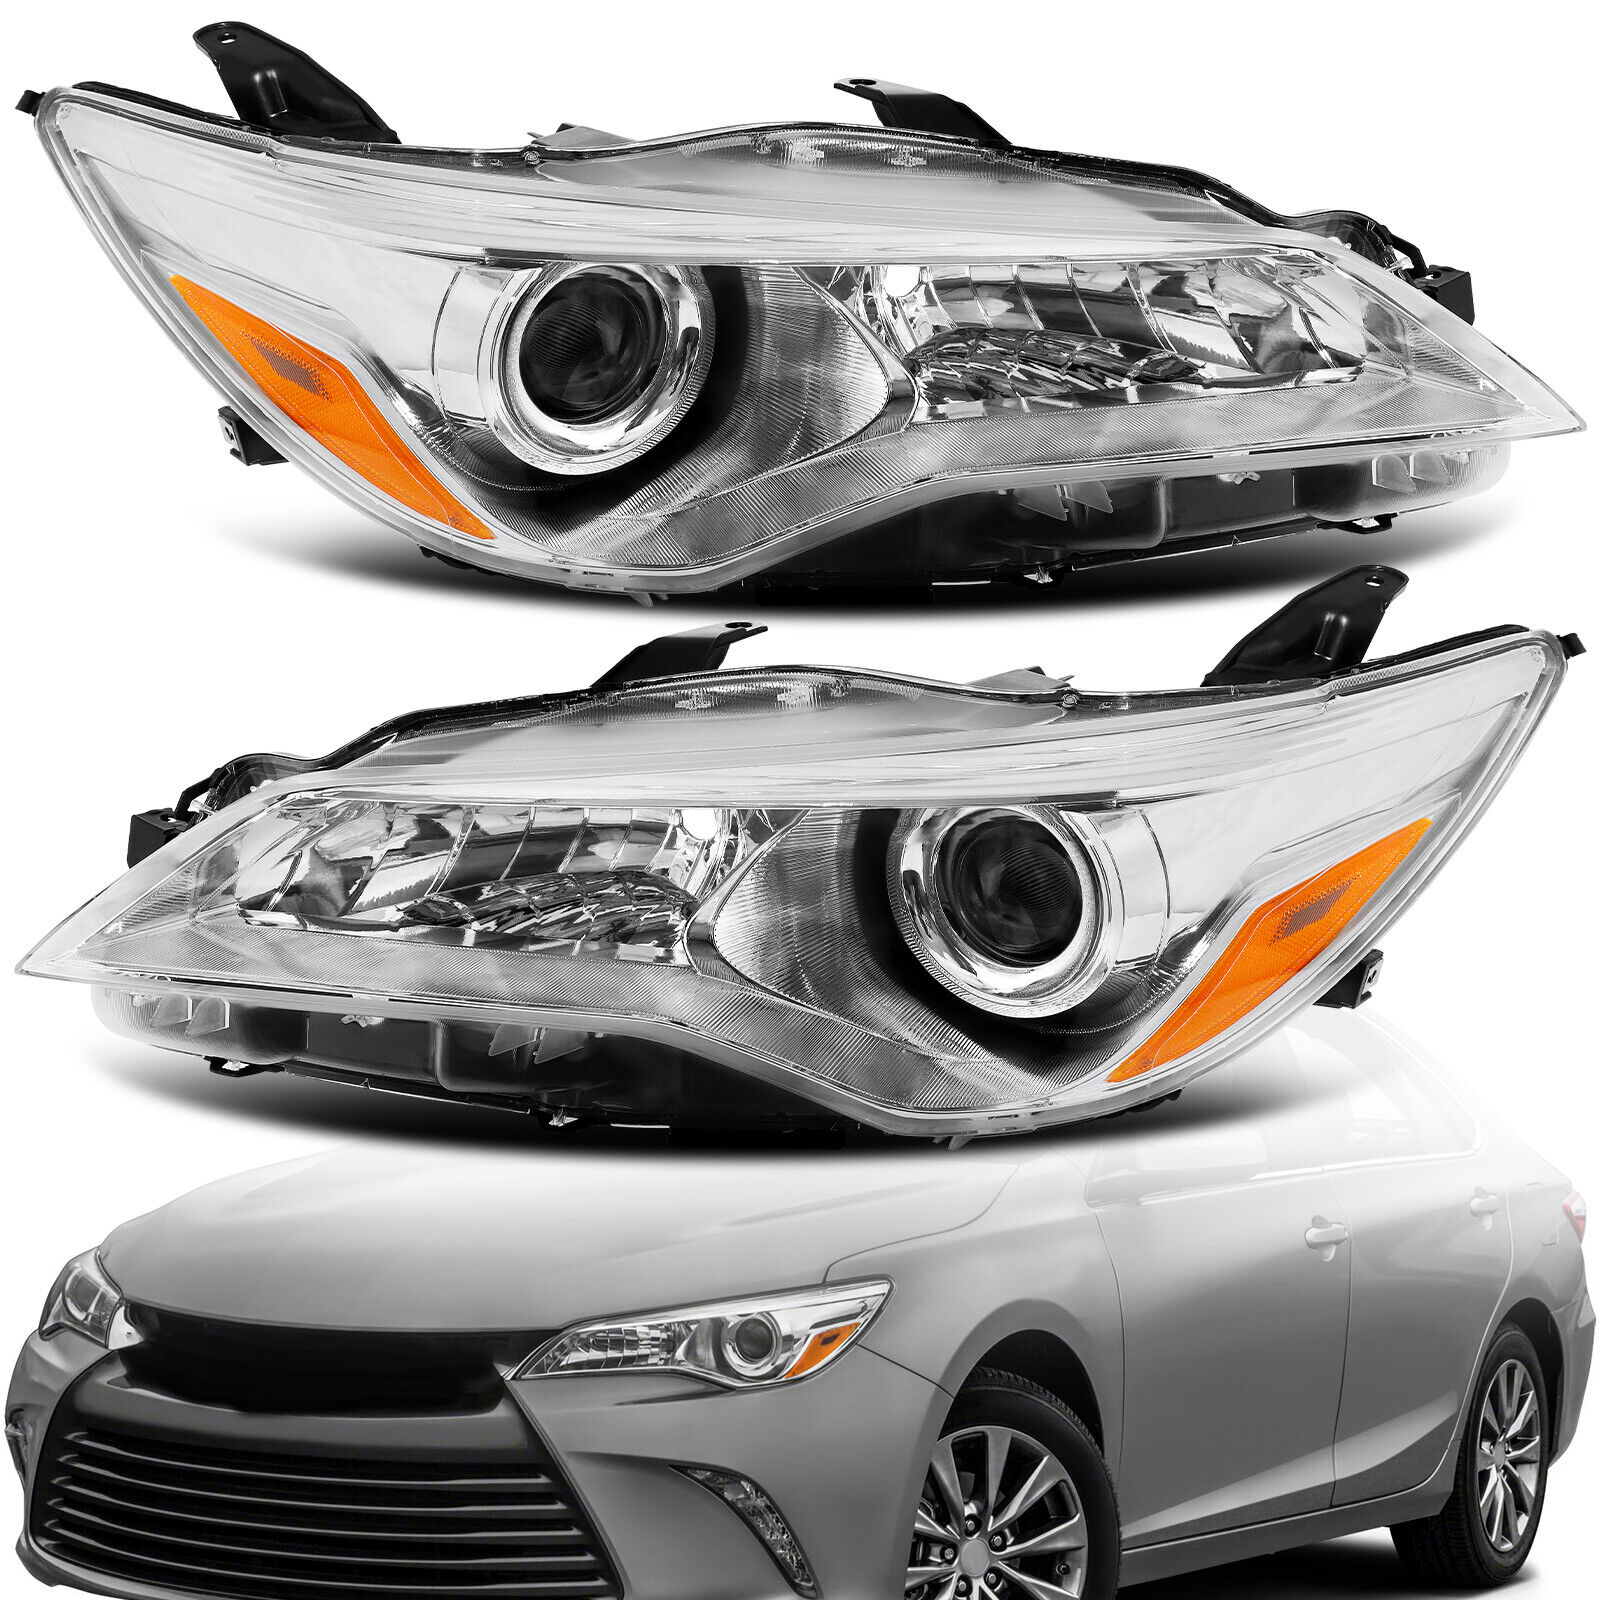 OEM Headlights For 2015 2016 2017 Toyota Camry LE SE XLE XSE Headlamp Left+Right